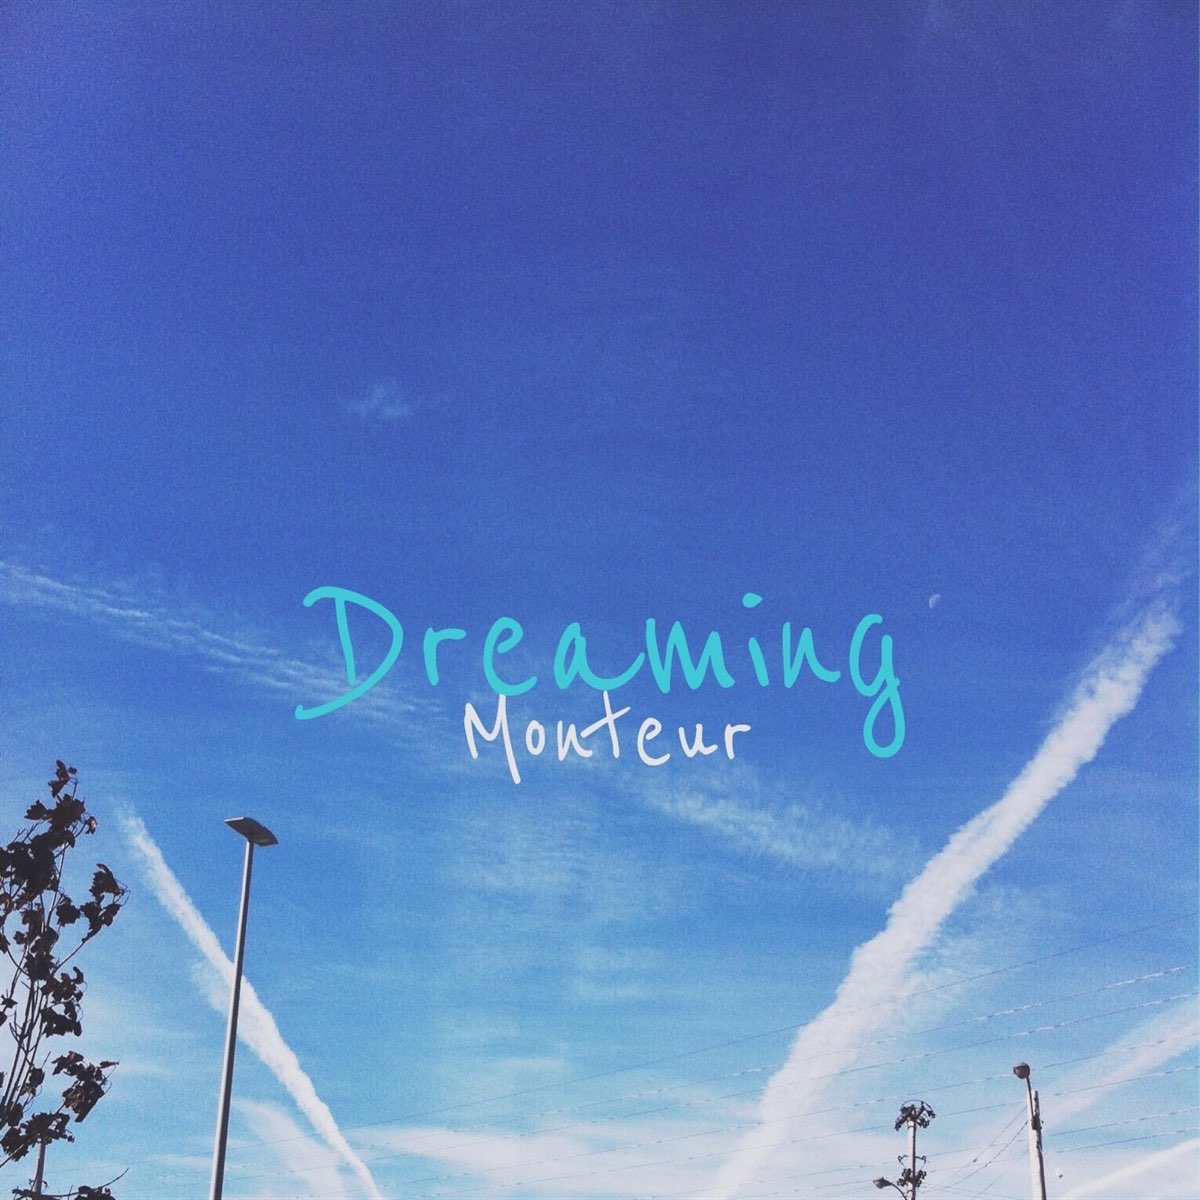 Dreaming single. Dreaming Cooper. Обложка песни про мечты. Dream Singles. Dreaming Cooper - mysterious places (2016).